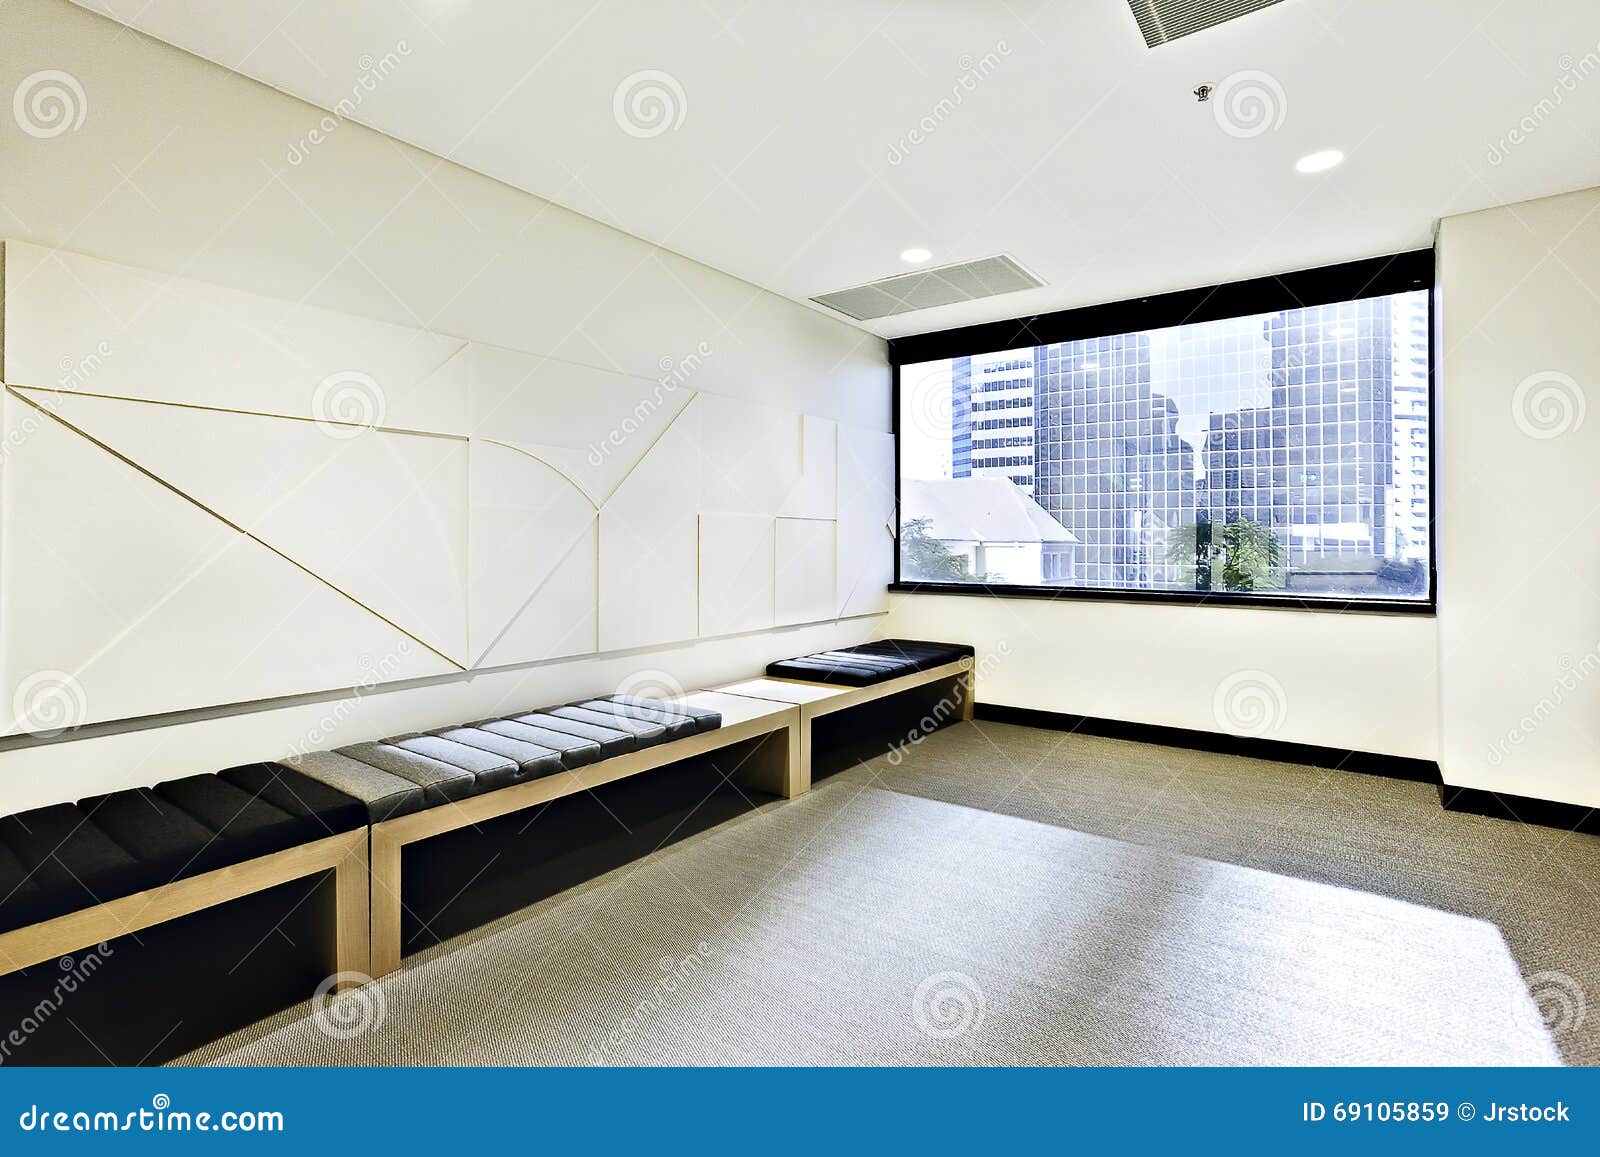 Modern Waiting Room With Space And Cushion Benches Stock Image Image Of Clean